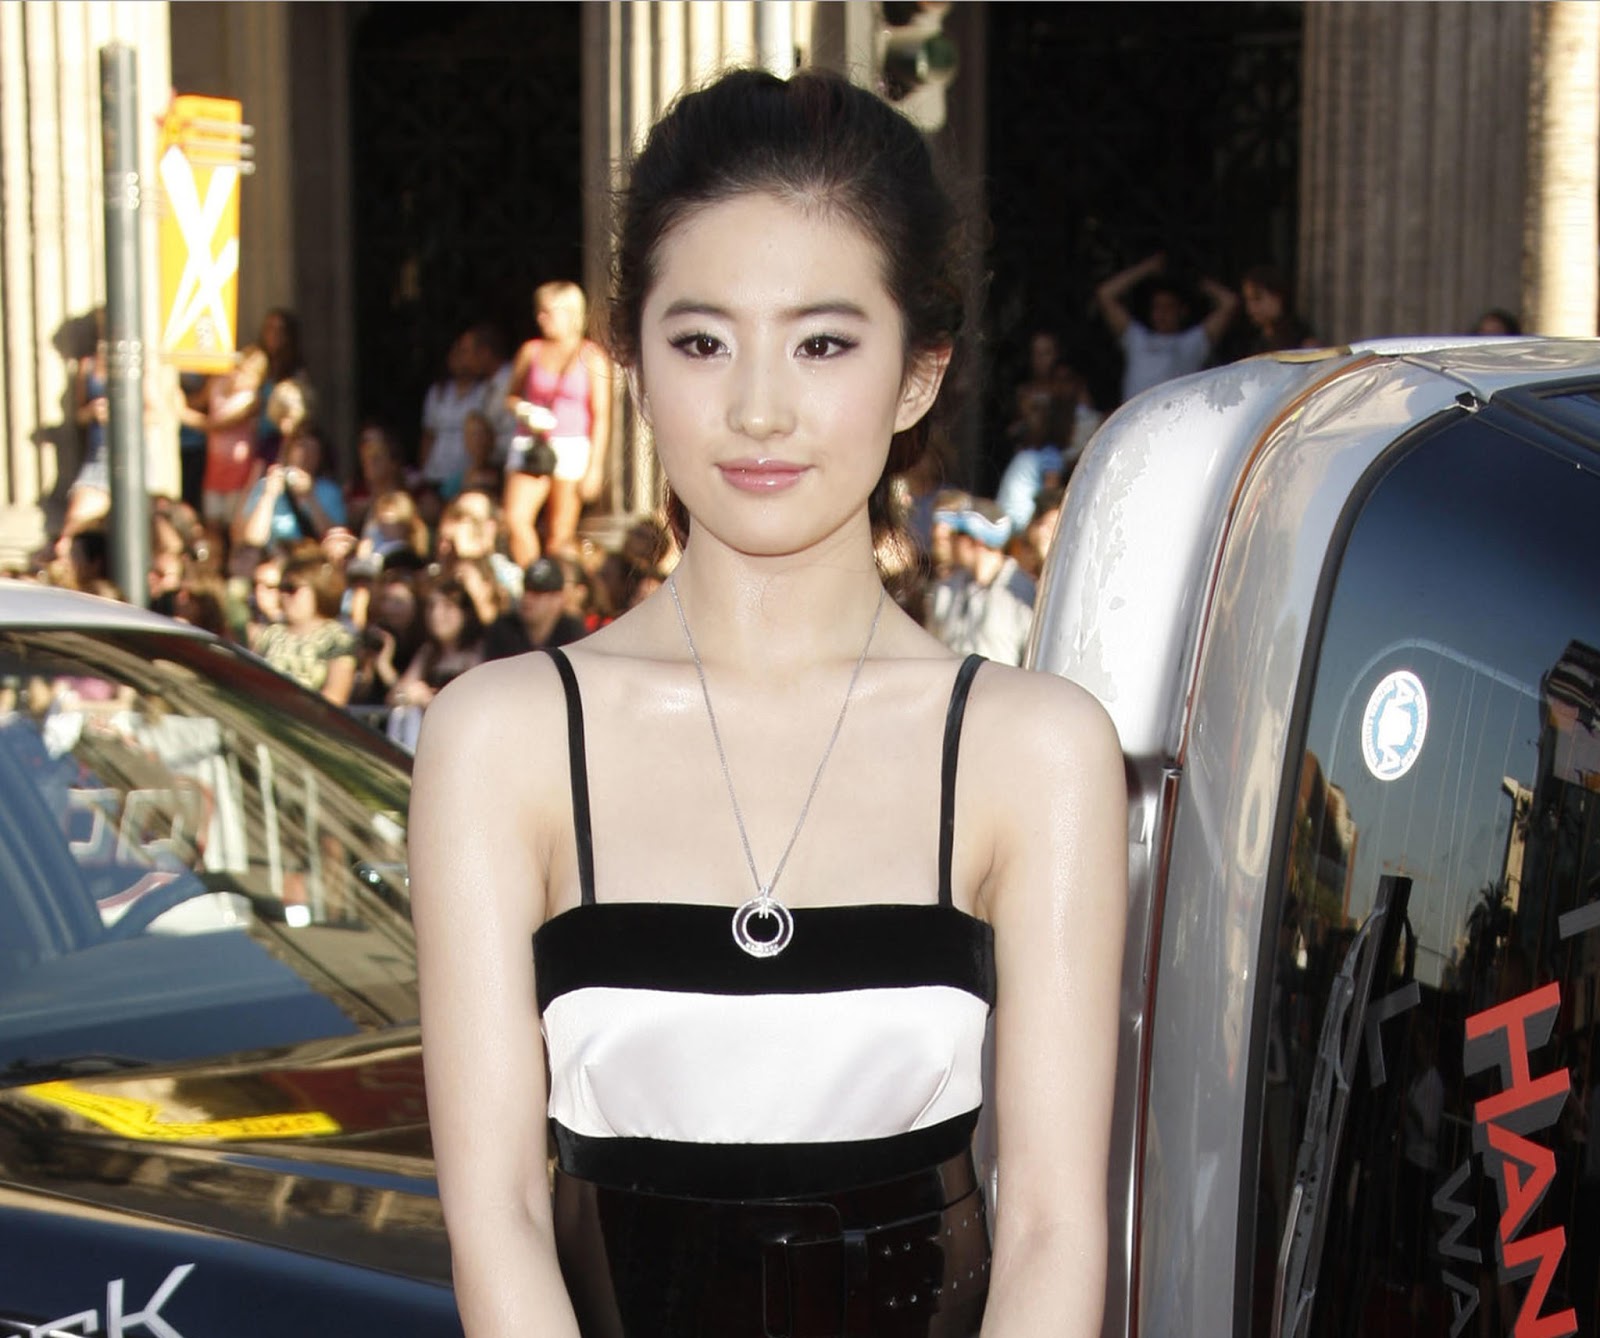 Disney casts Chinese actress Liu Yifei in live-action 'Mulan'